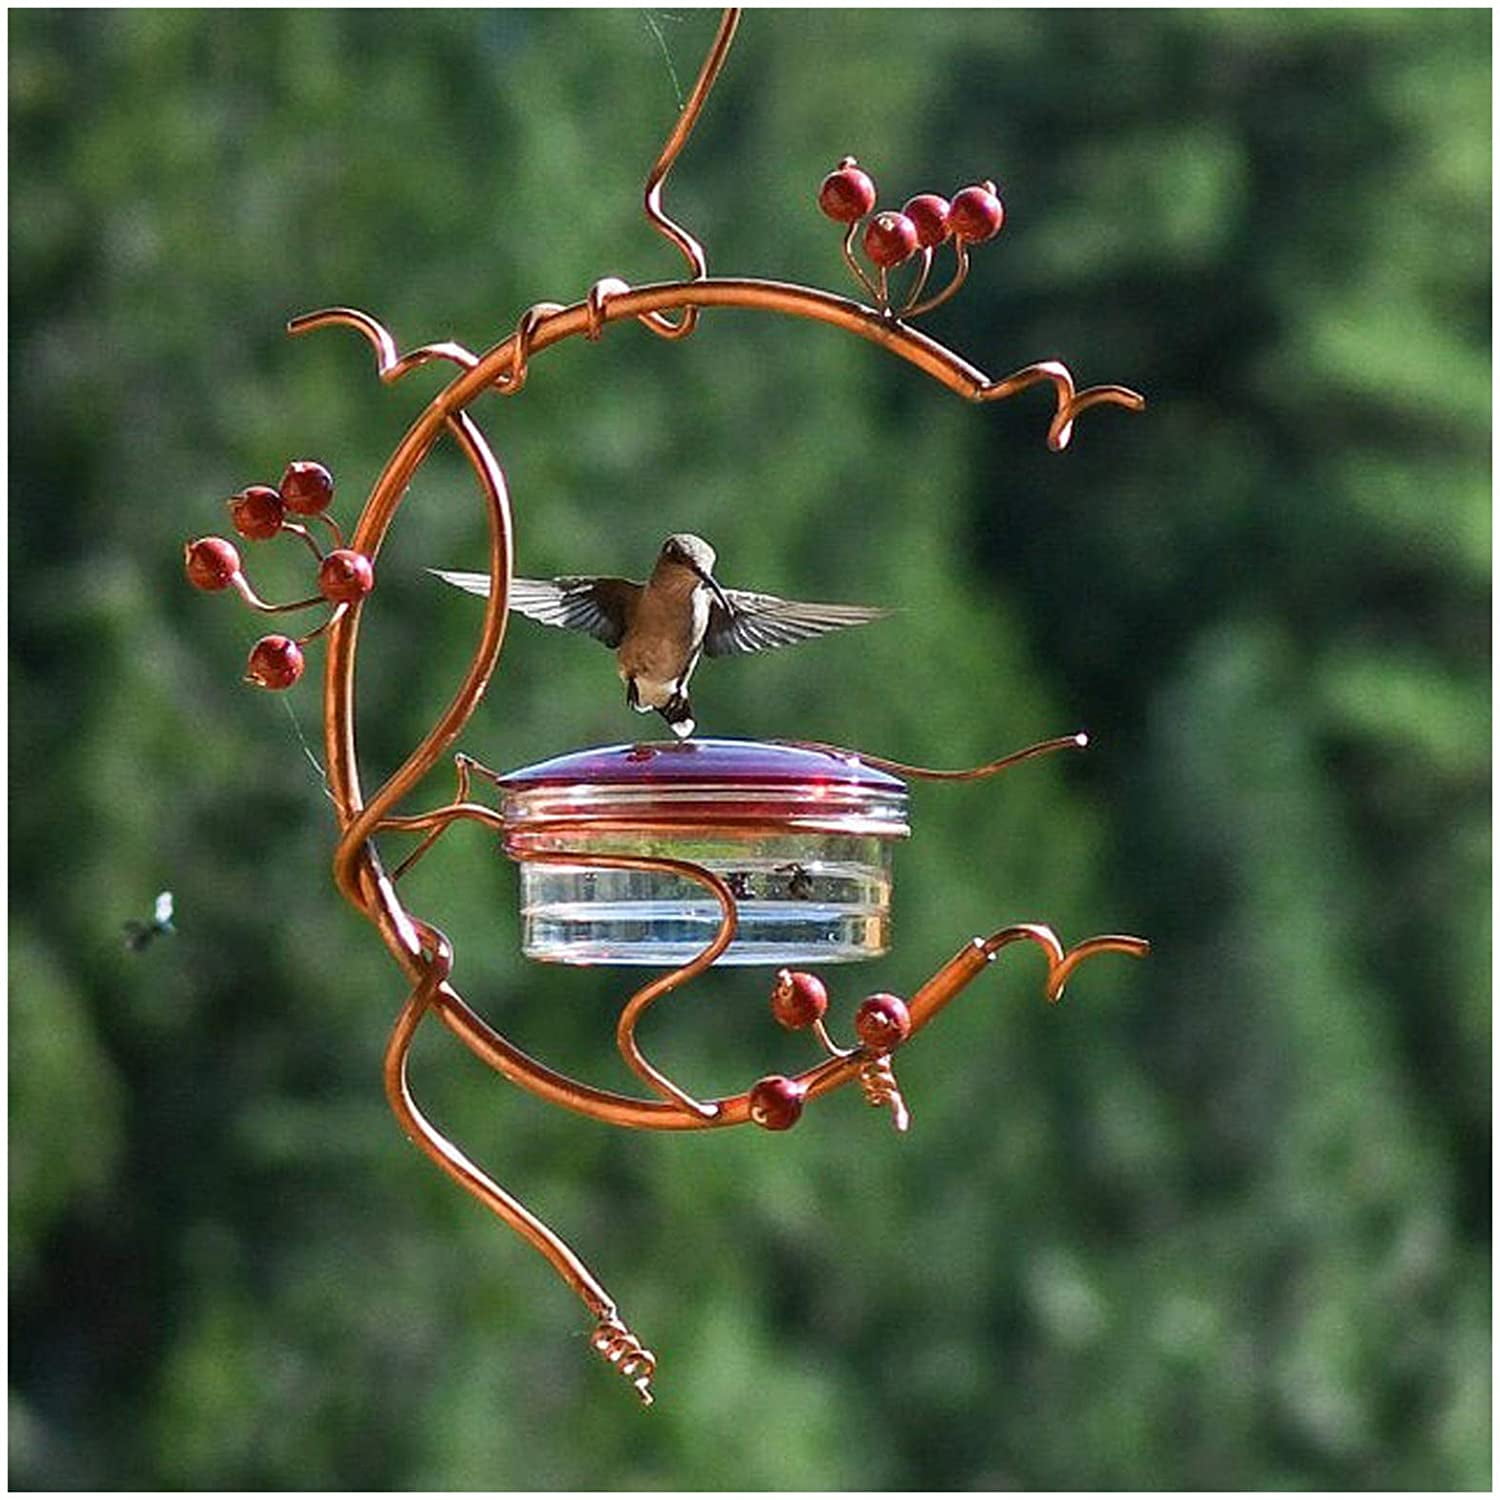 Best Hummingbird Feeder with Hole Birds Feeding Pipe Red Transparent Tube 